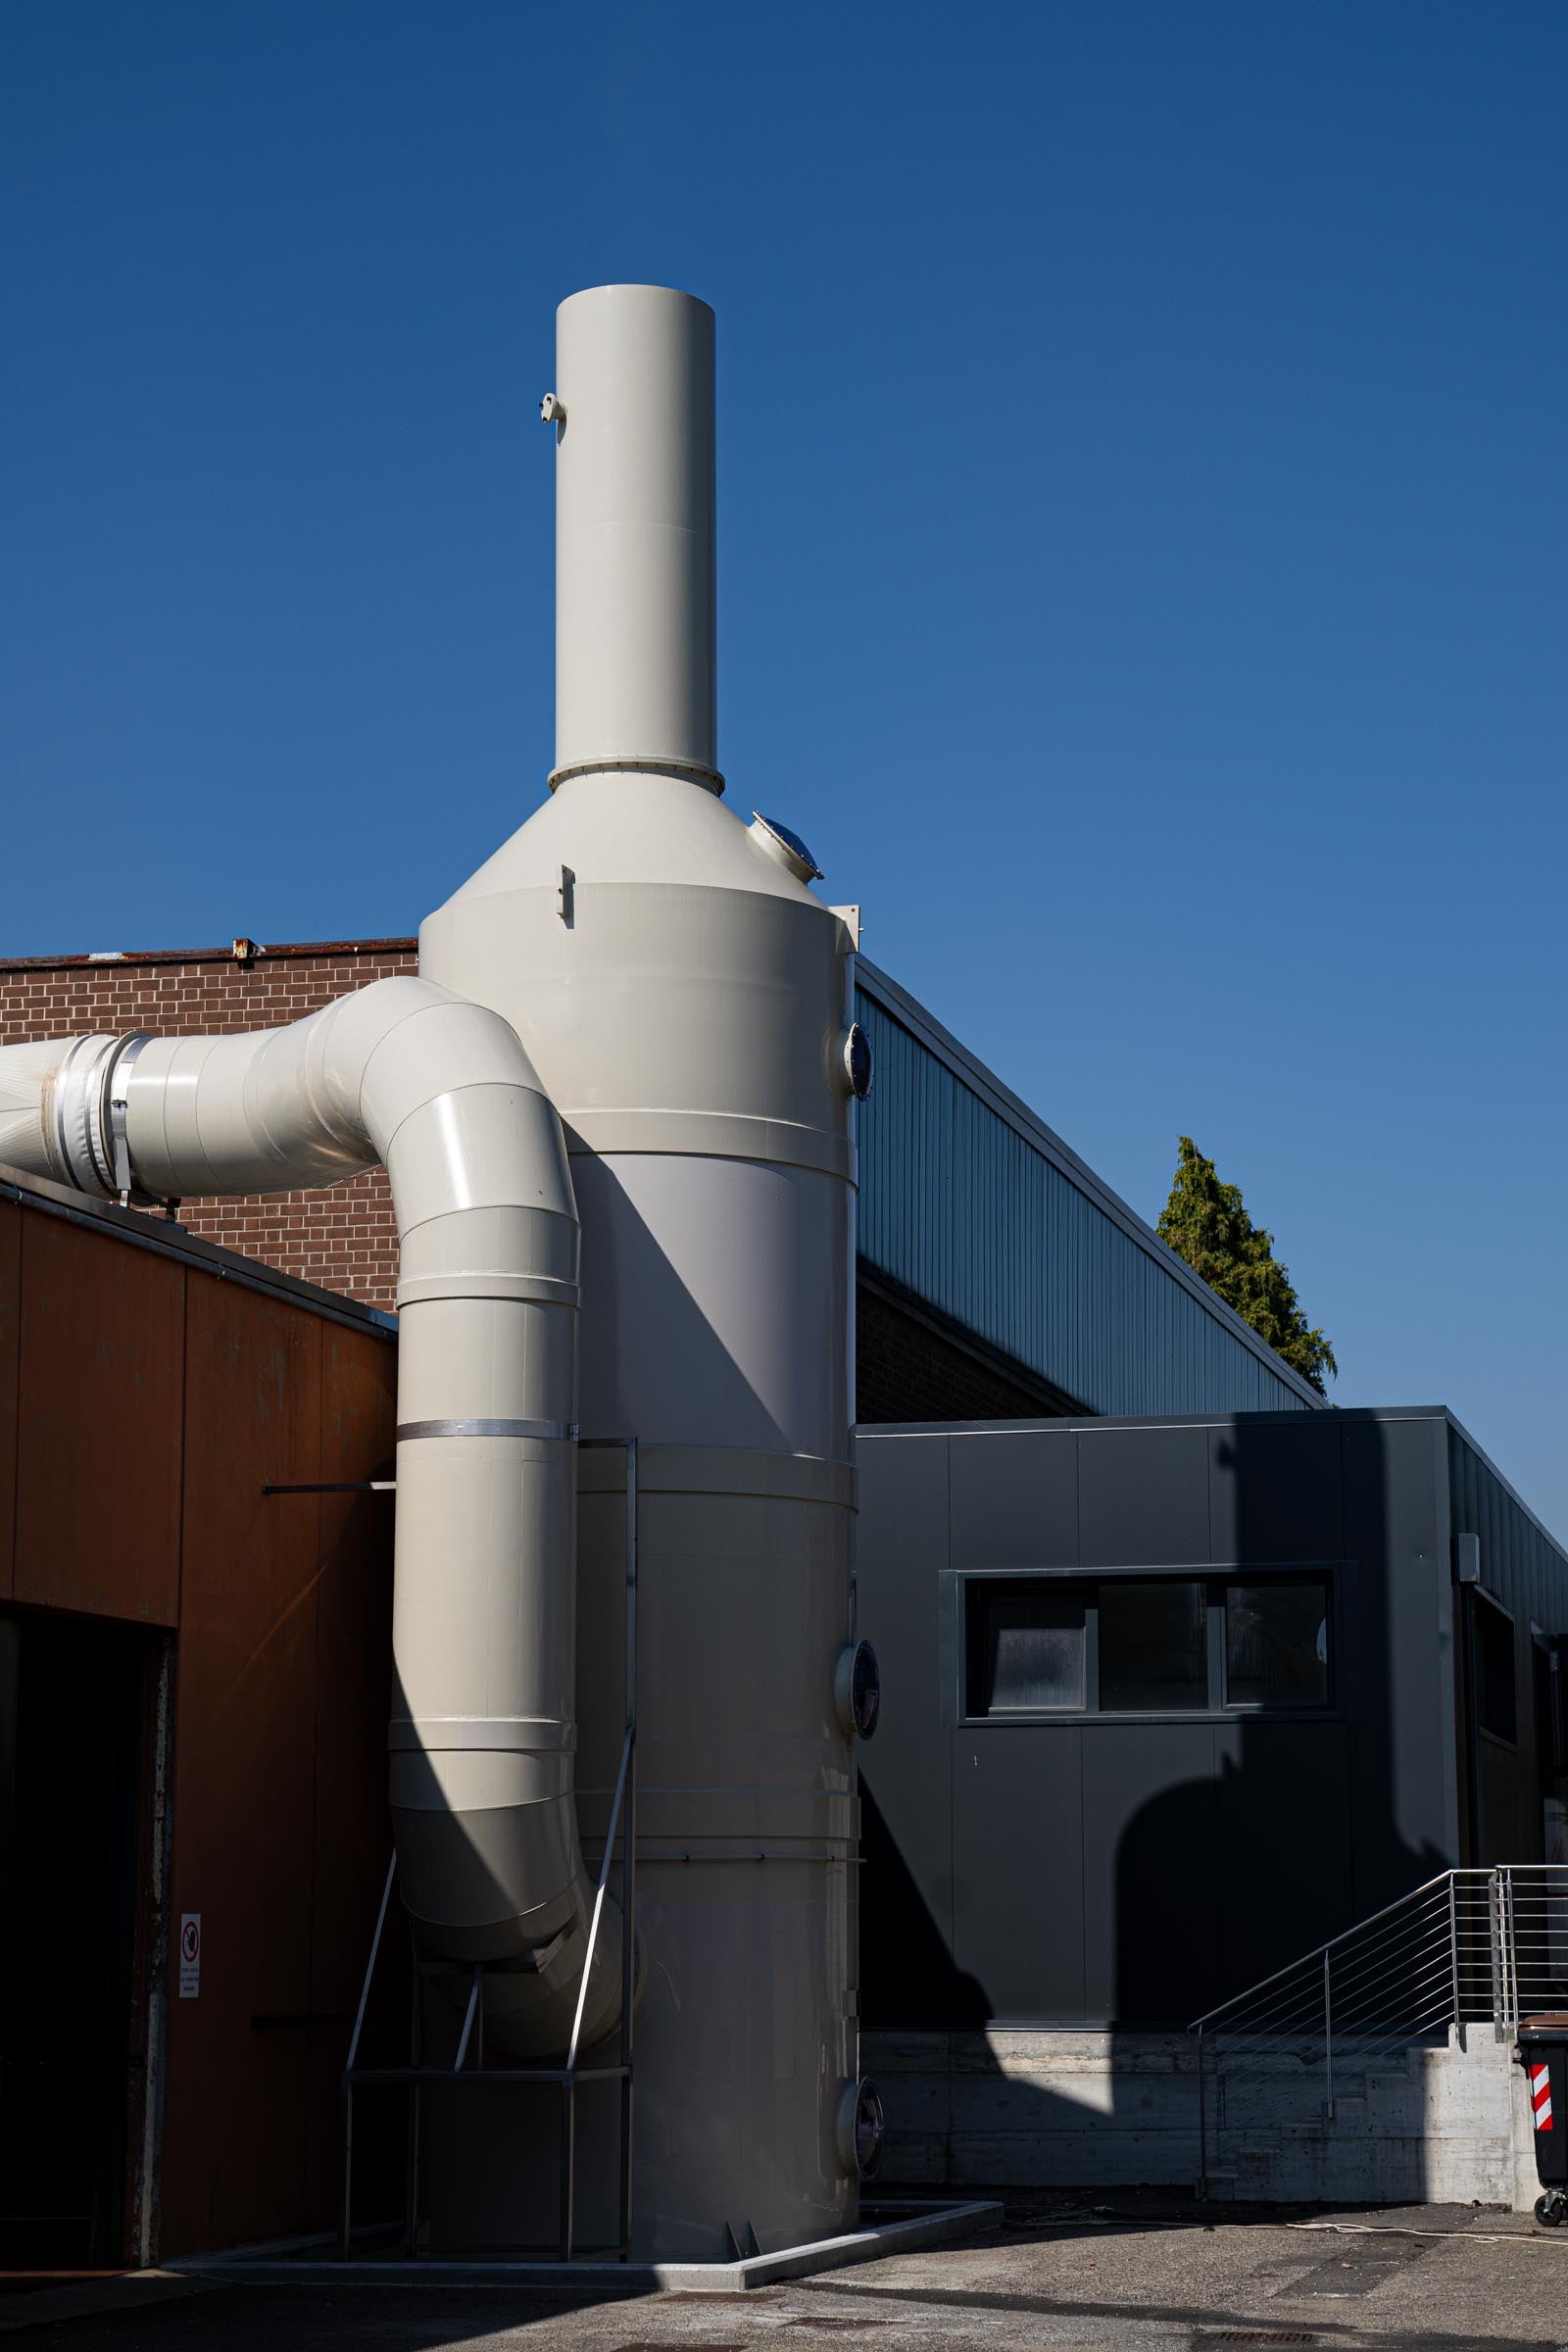 A brand new water purification installation outside the Tintoria Ferraris dyeing facility.